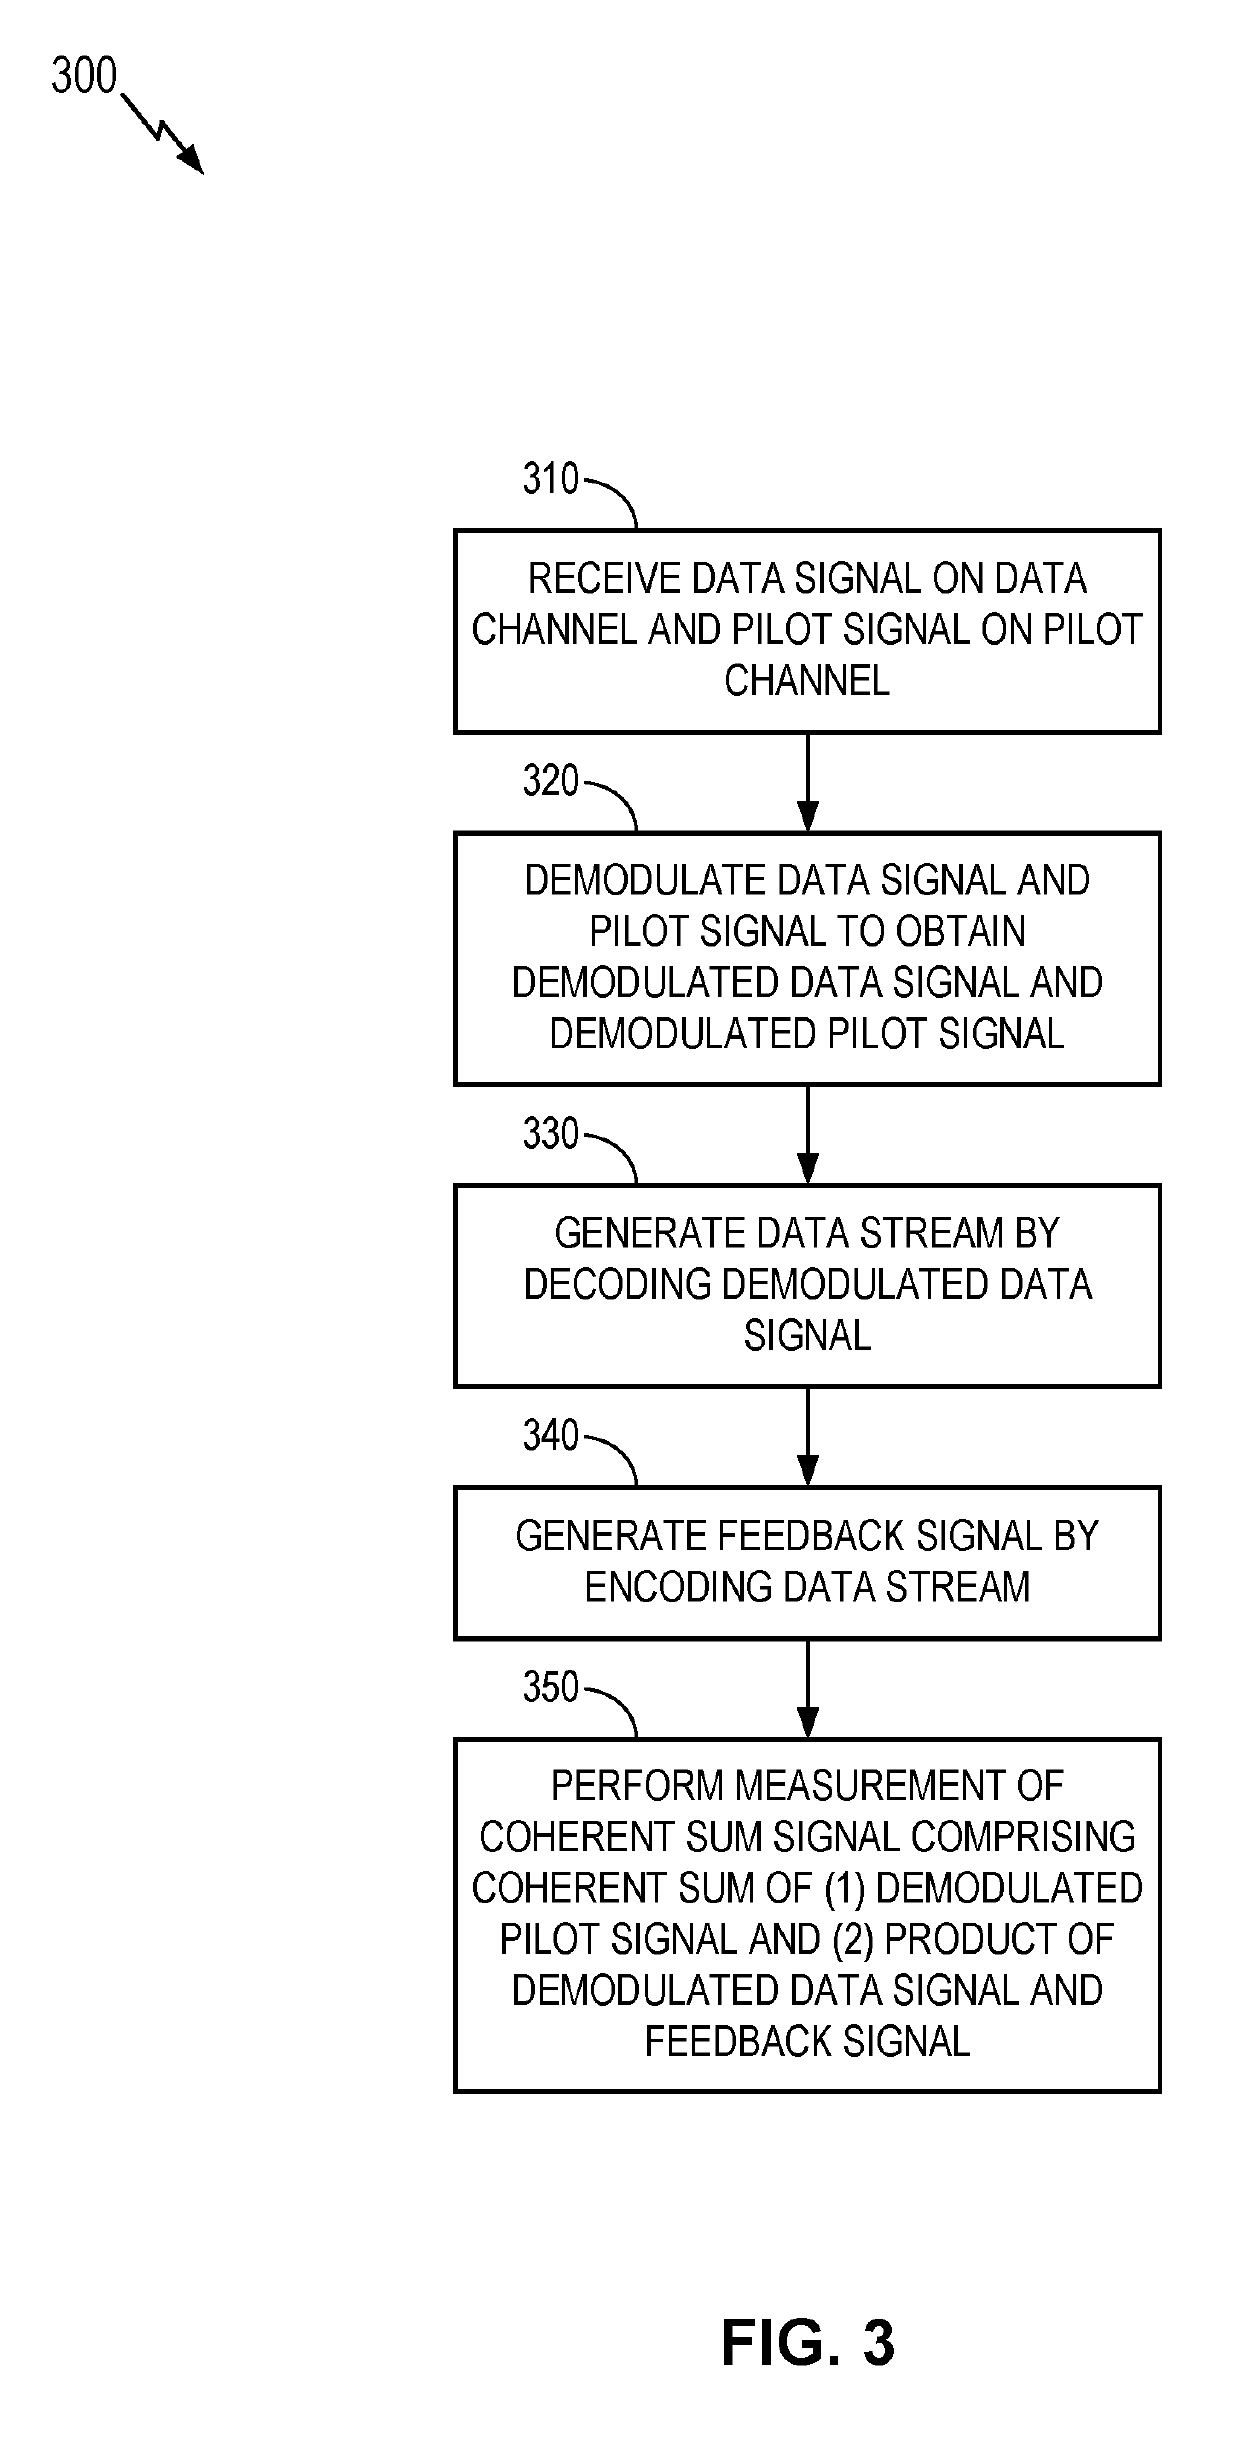 Measurement of data streams comprising data and pilot channels